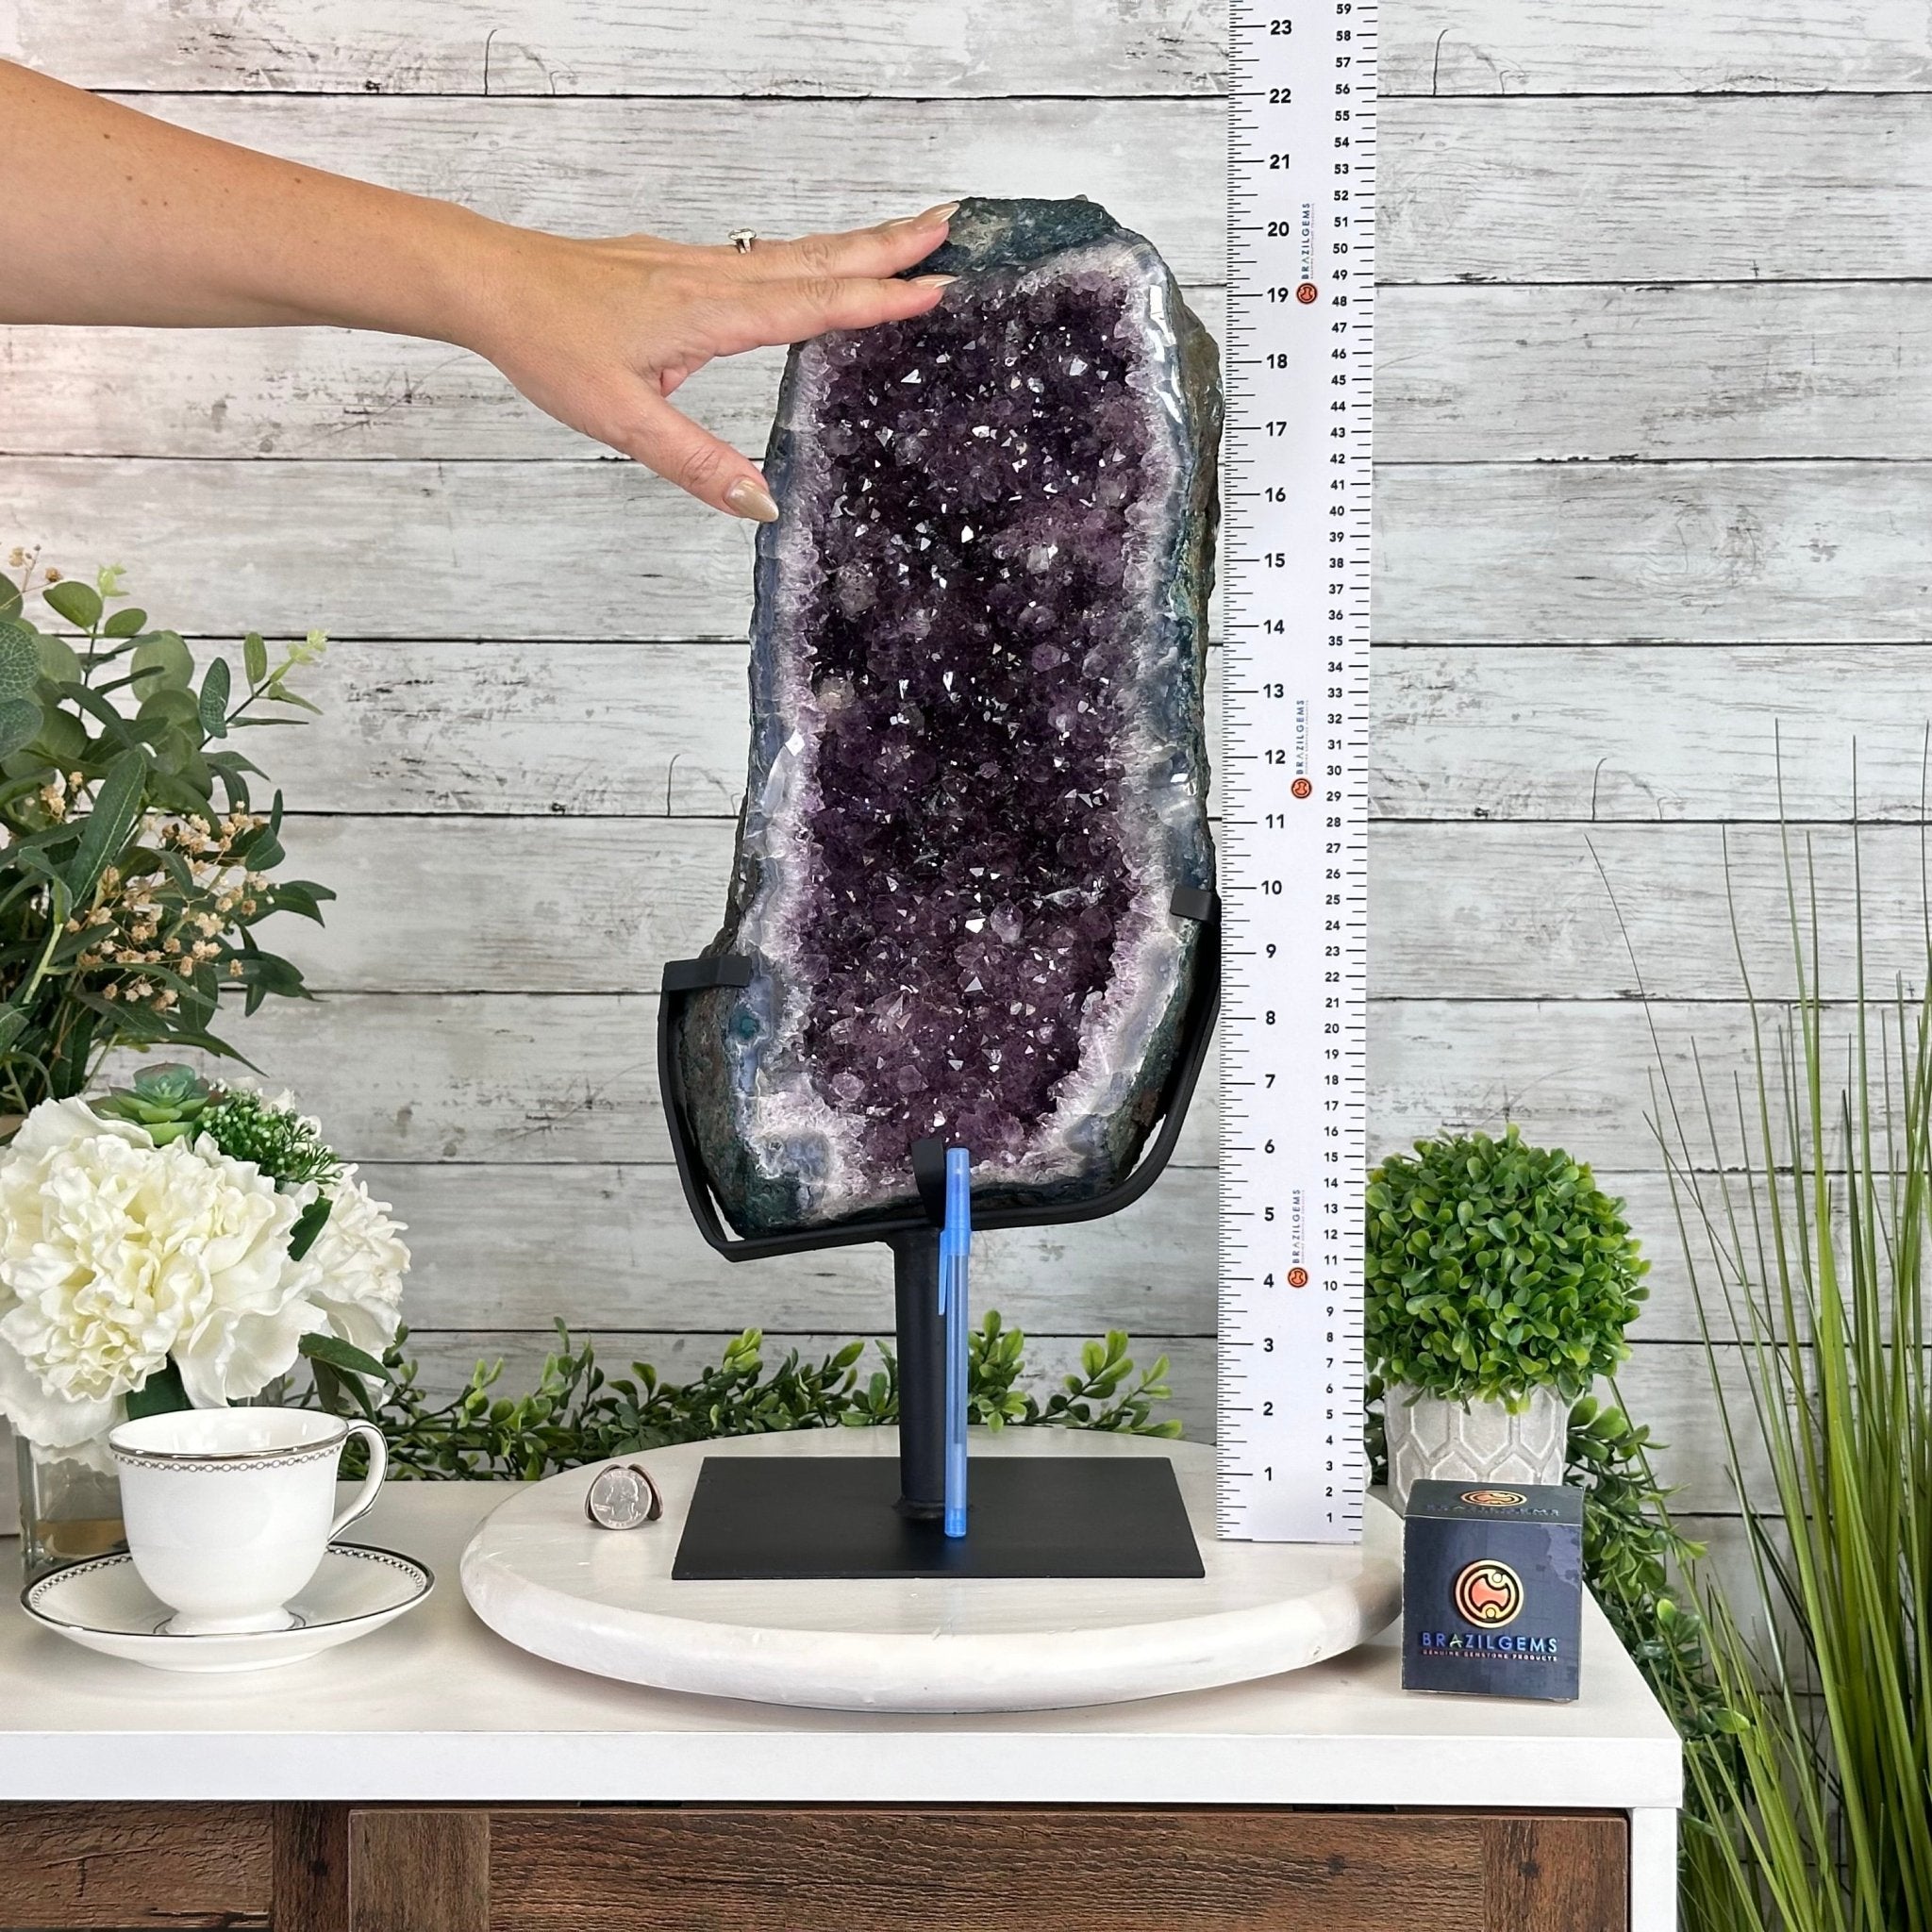 Amethyst Cluster on a Metal Base, 30.3 lbs & 20.4" Tall #5491 - 0103 - Brazil GemsBrazil GemsAmethyst Cluster on a Metal Base, 30.3 lbs & 20.4" Tall #5491 - 0103Clusters on Fixed Bases5491 - 0103